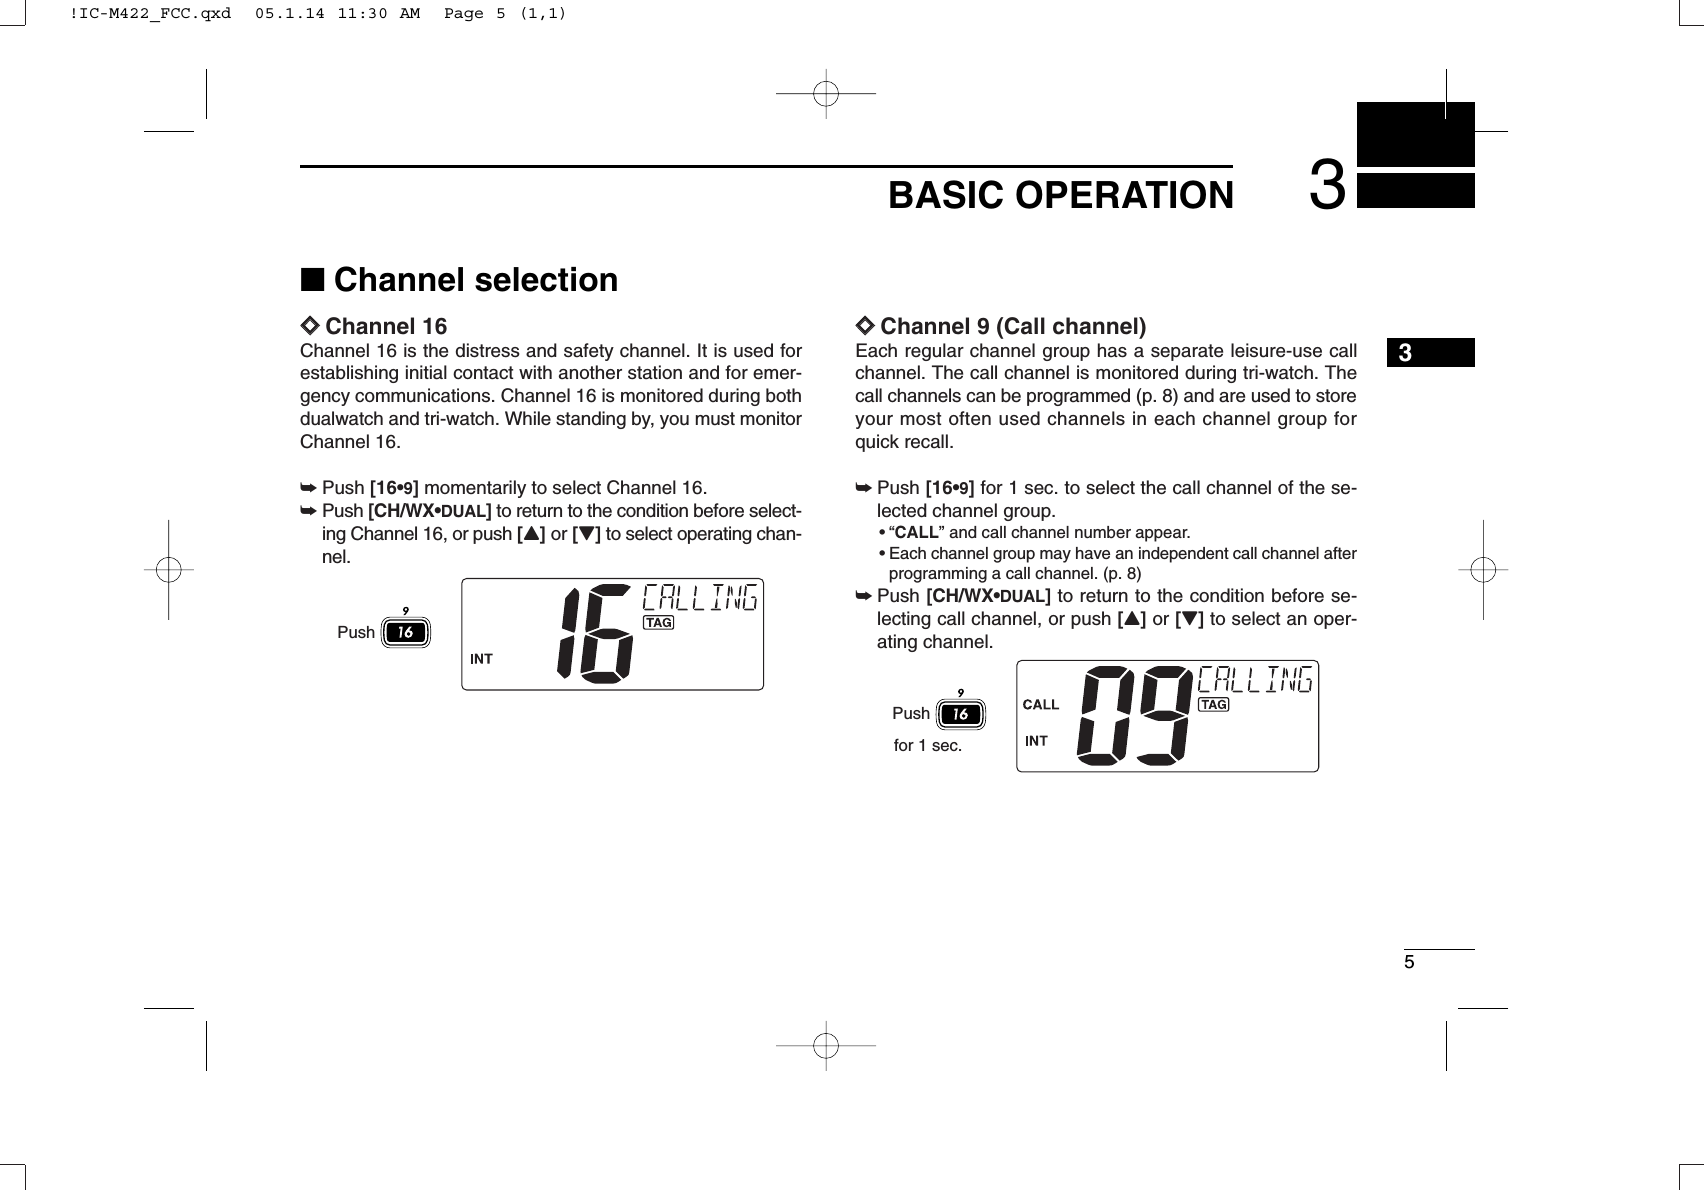 53BASIC OPERATION3■Channel selectionïïChannel 16Channel 16 is the distress and safety channel. It is used forestablishing initial contact with another station and for emer-gency communications. Channel 16 is monitored during bothdualwatch and tri-watch. While standing by, you must monitorChannel 16.➥Push [16•9]momentarily to select Channel 16.➥Push [CH/WX•DUAL]to return to the condition before select-ing Channel 16, or push [Y]or [Z]to select operating chan-nel.ïïChannel 9 (Call channel)Each regular channel group has a separate leisure-use callchannel. The call channel is monitored during tri-watch. Thecall channels can be programmed (p. 8) and are used to storeyour most often used channels in each channel group forquick recall.➥Push [16•9]for 1 sec. to select the call channel of the se-lected channel group.•“CALL” and call channel number appear.•Each channel group may have an independent call channel afterprogramming a call channel. (p. 8)➥Push [CH/WX•DUAL]to return to the condition before se-lecting call channel, or push [Y]or [Z]to select an oper-ating channel.Pushfor 1 sec.Push!IC-M422_FCC.qxd  05.1.14 11:30 AM  Page 5 (1,1)